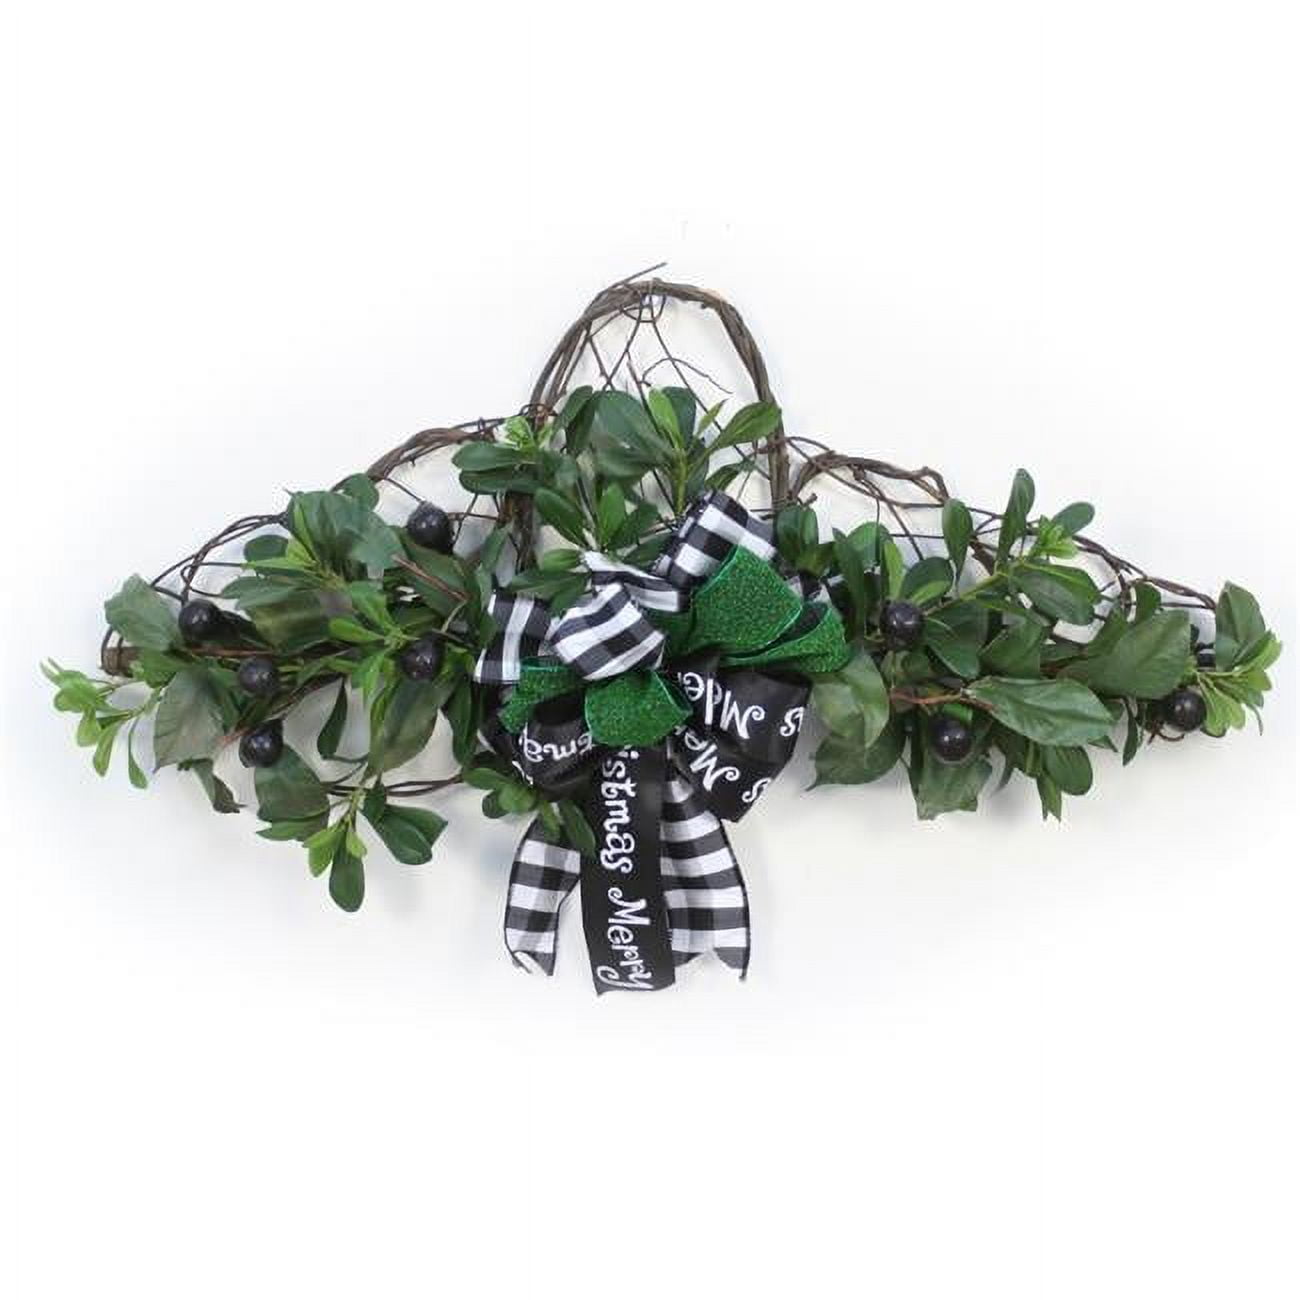 Picture of Disttive Designs XA-264A Unisex Vine Wall Hanging with Olives & Pittosporum with Black & Green Ribbon